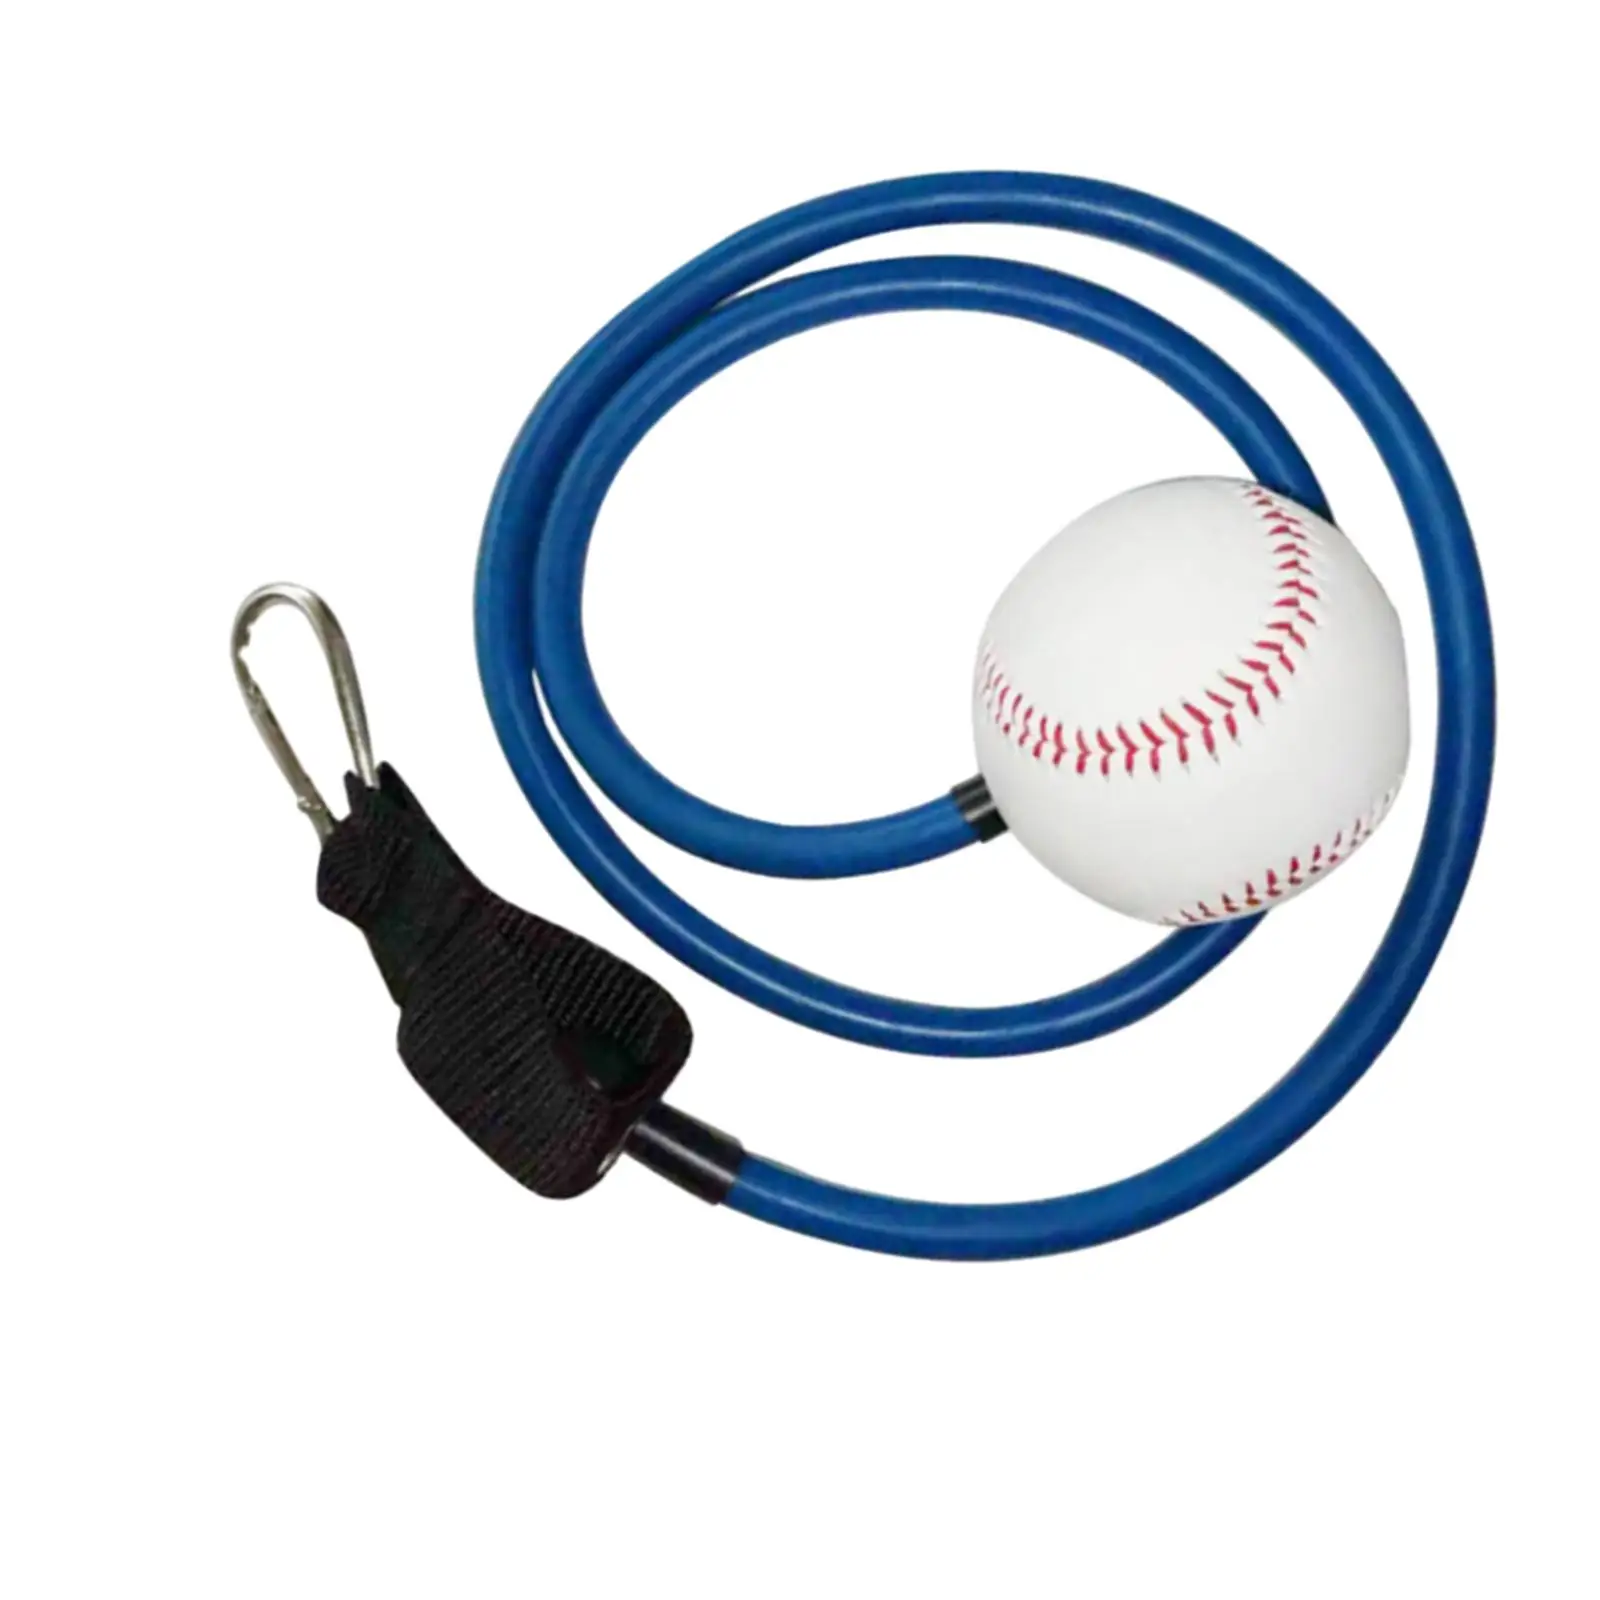 Baseball Pitching Bands Portable Baseball Trainer Outdoor Baseball Training Bands for Kids Adults Throwing Workout Stretch Arm